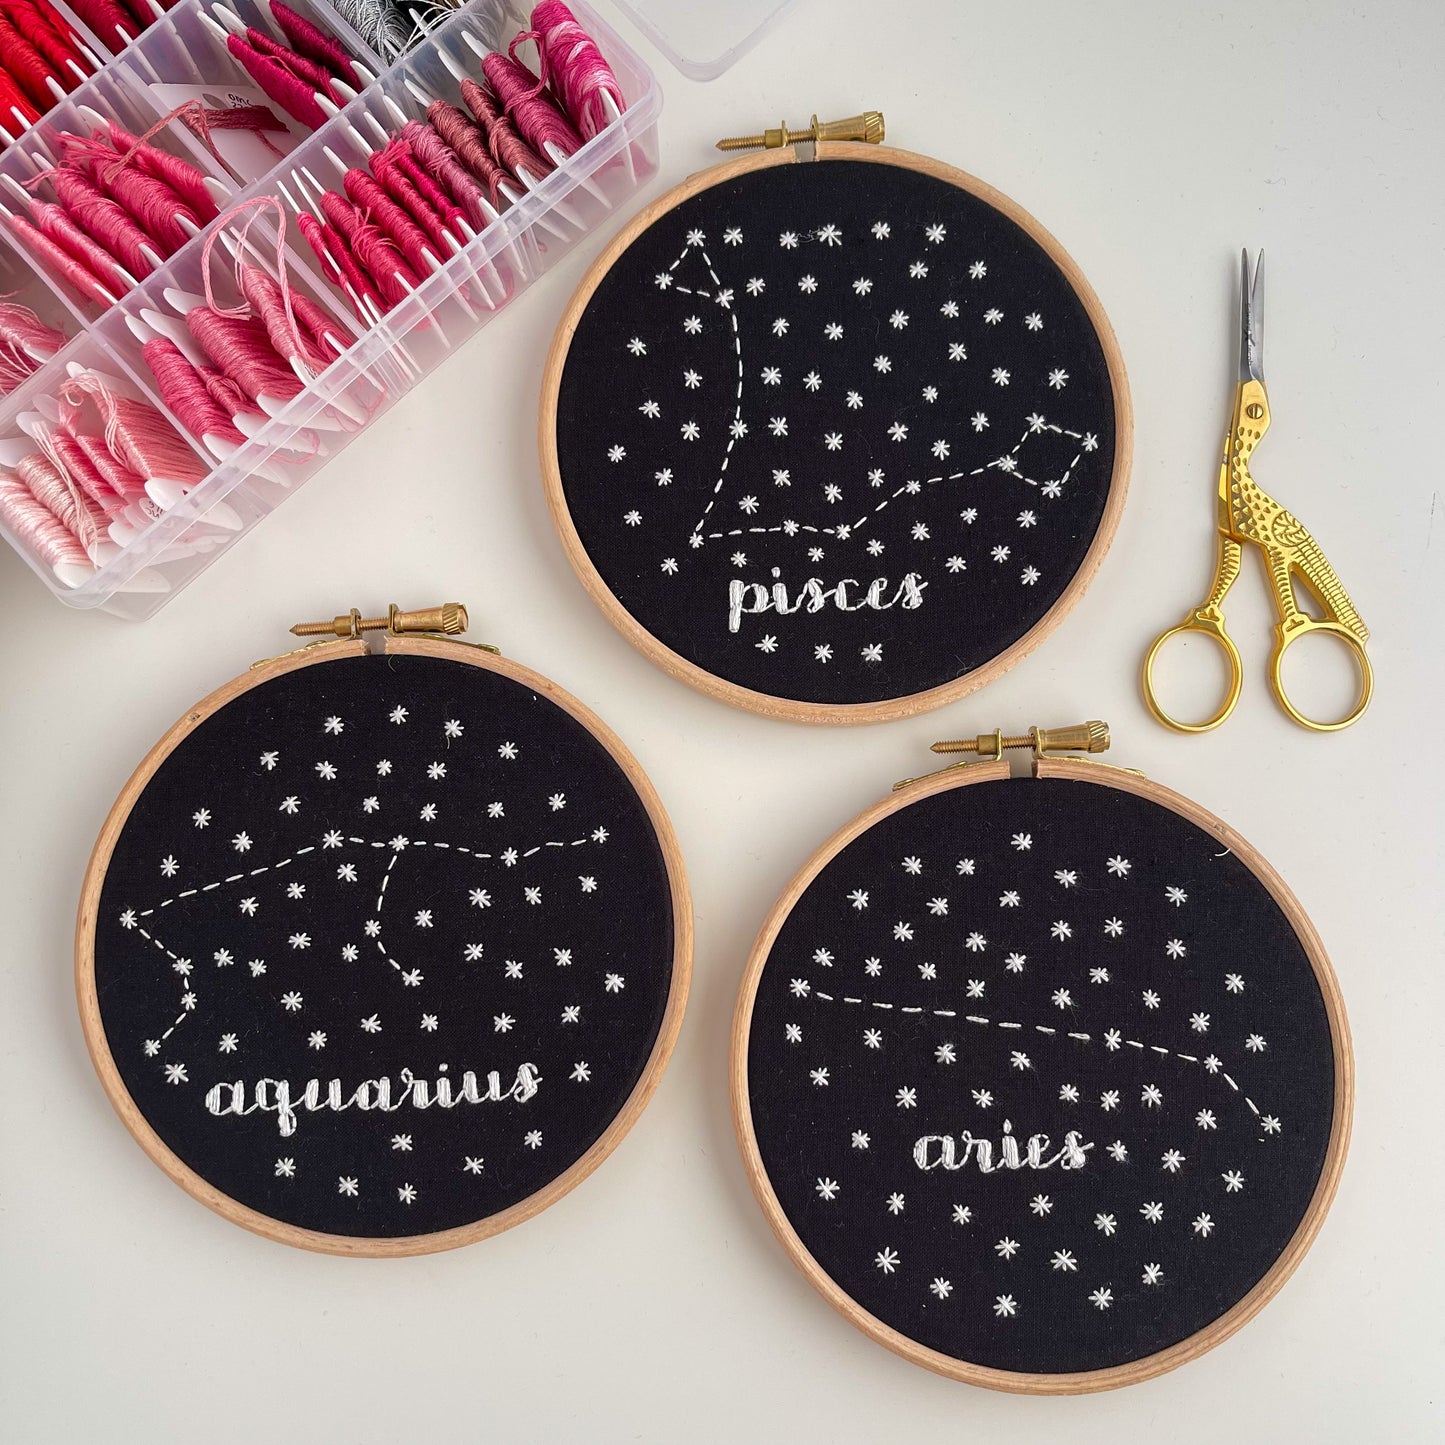 Star Sign Hand Embroidery Hoop